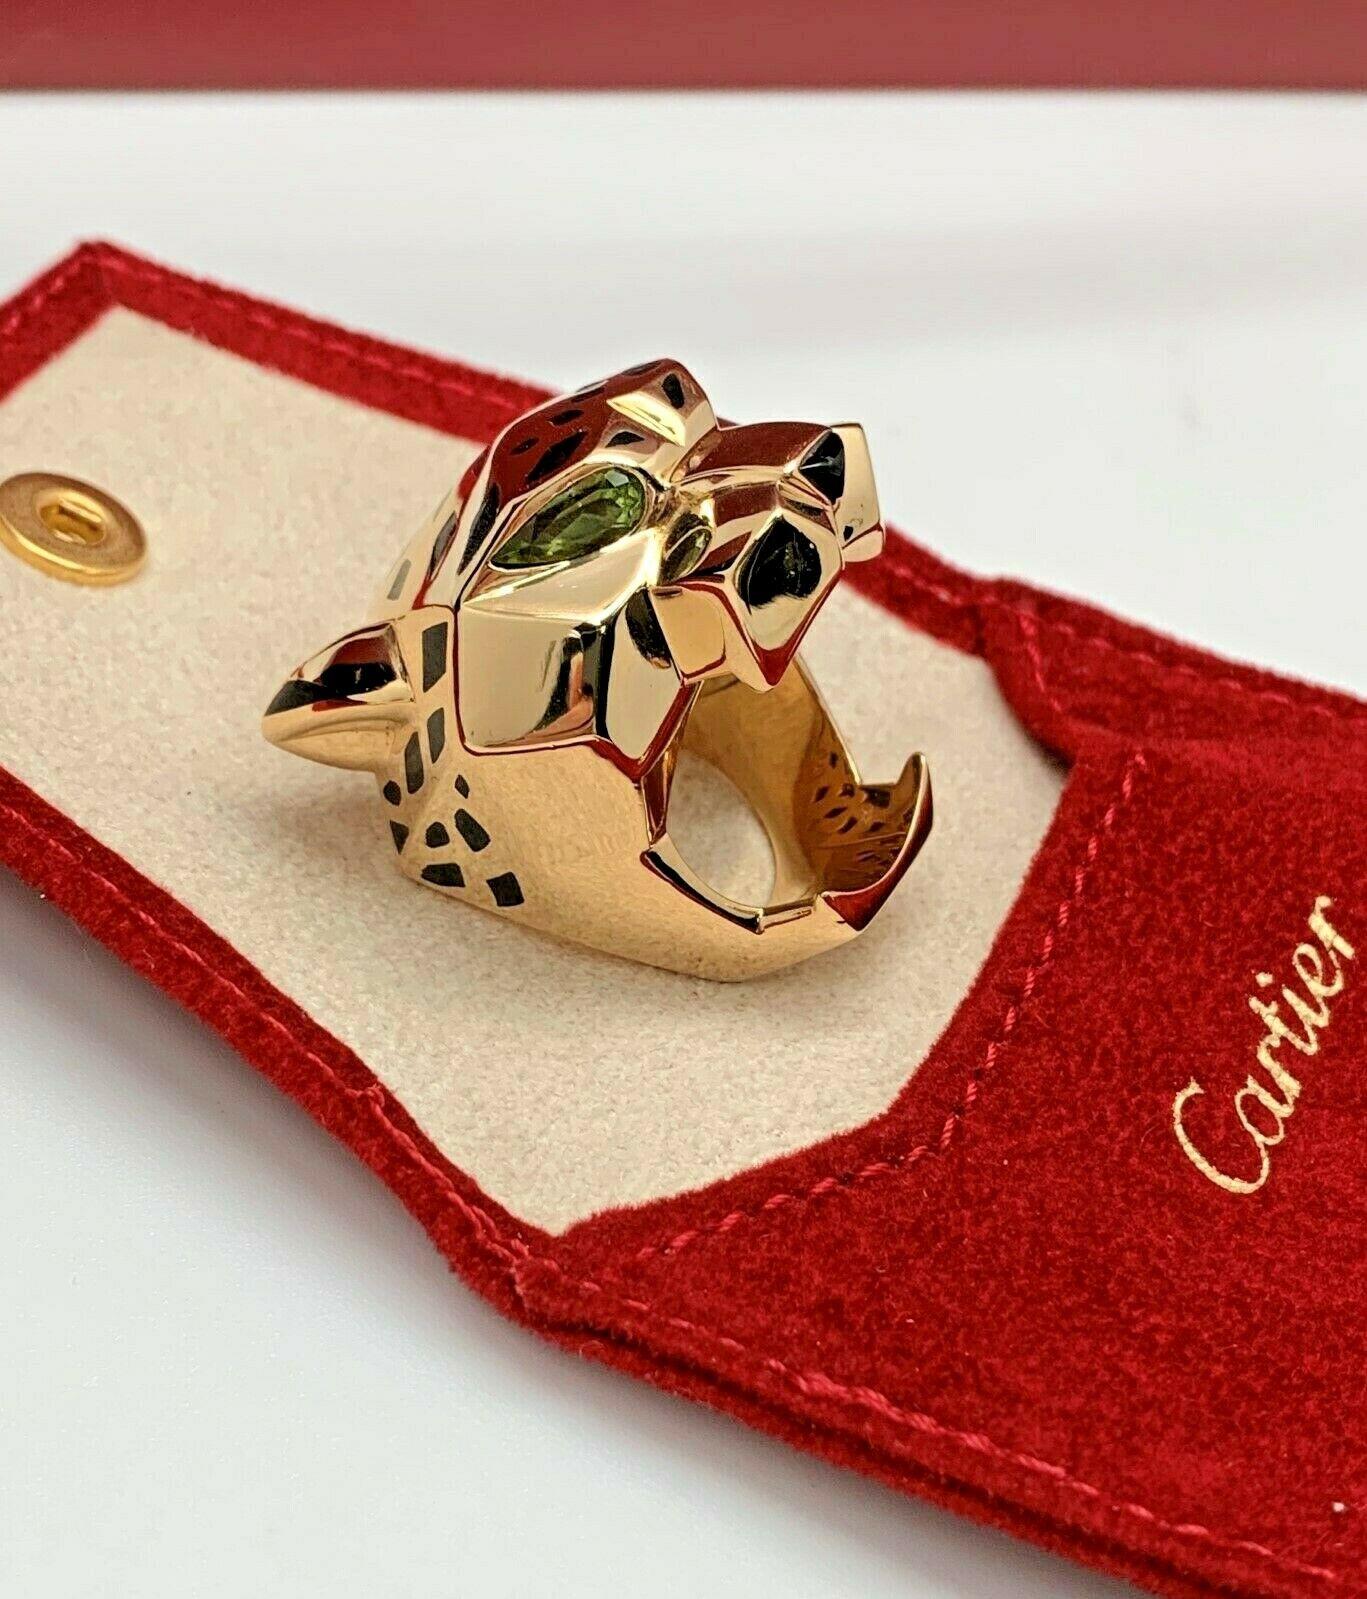 ITEM'S DESCRIPTION:

This exquisite Panthère de Cartier ring features a chic and fierce openwork panther design crafted in 18k yellow gold and accented with peridot eyes and a black onyx nose. Made in France circa 2010s. This beautiful ring has just